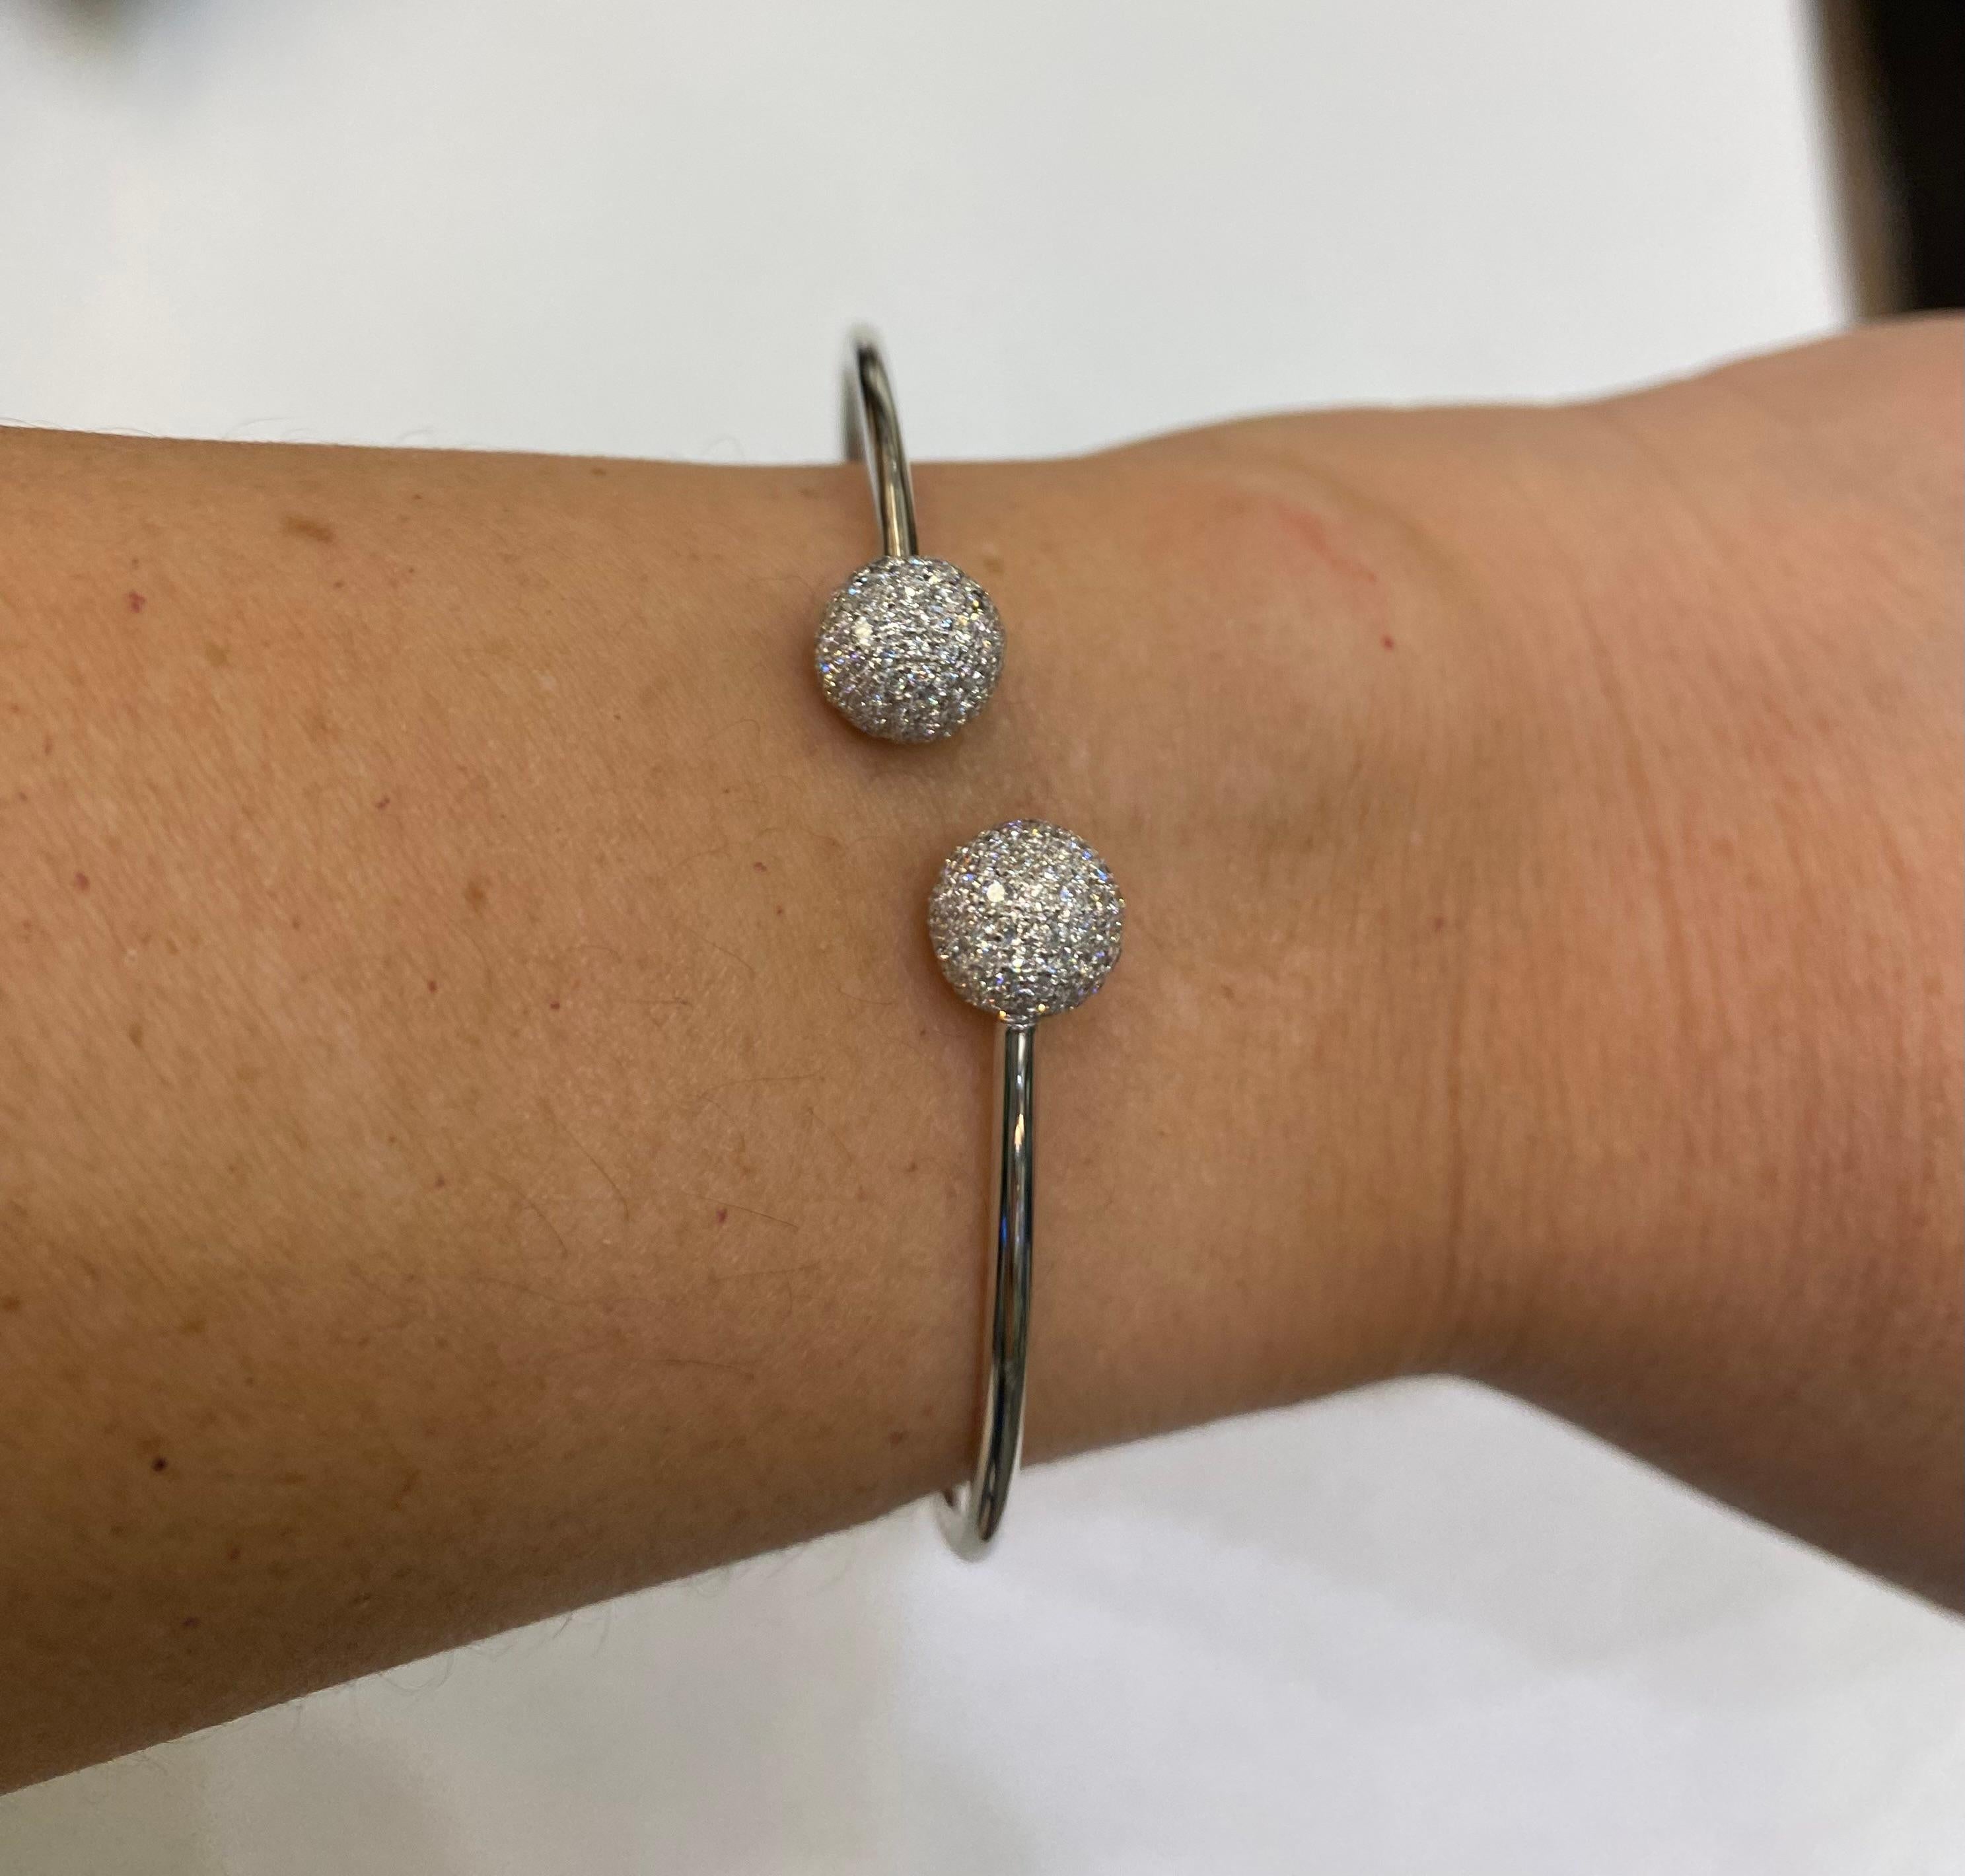 A diamond ball bangle bracelet in 18 karat white gold with 1.80 carats of diamonds.
This bracelet features a bangle-style design, which means it's a rigid bracelet without a clasp, meant to slip over the wrist. The 